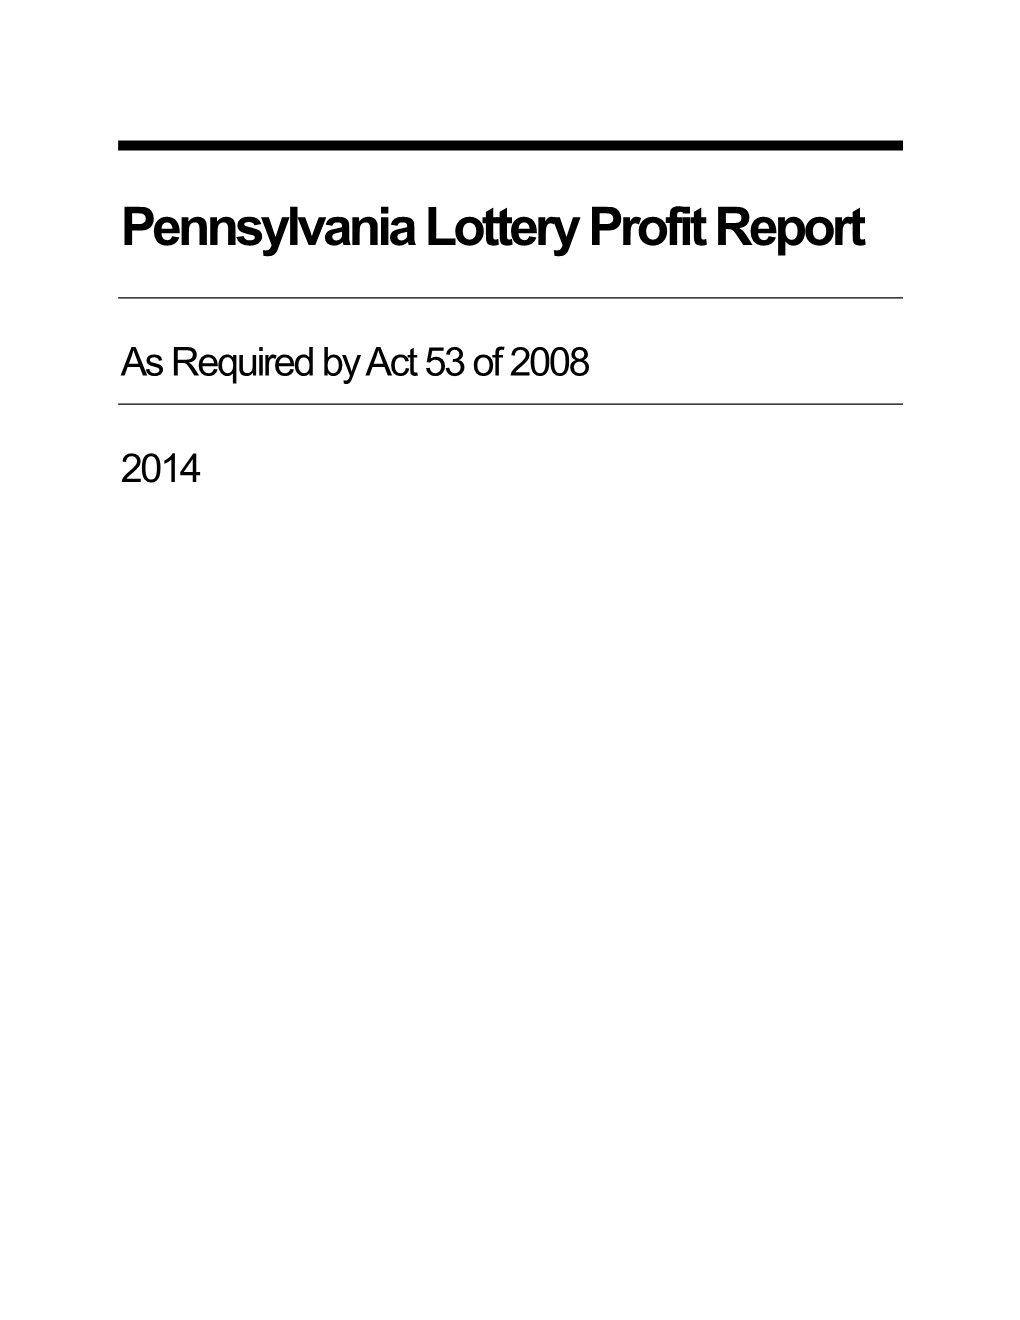 Profit Report for the Pennsylvania Lottery